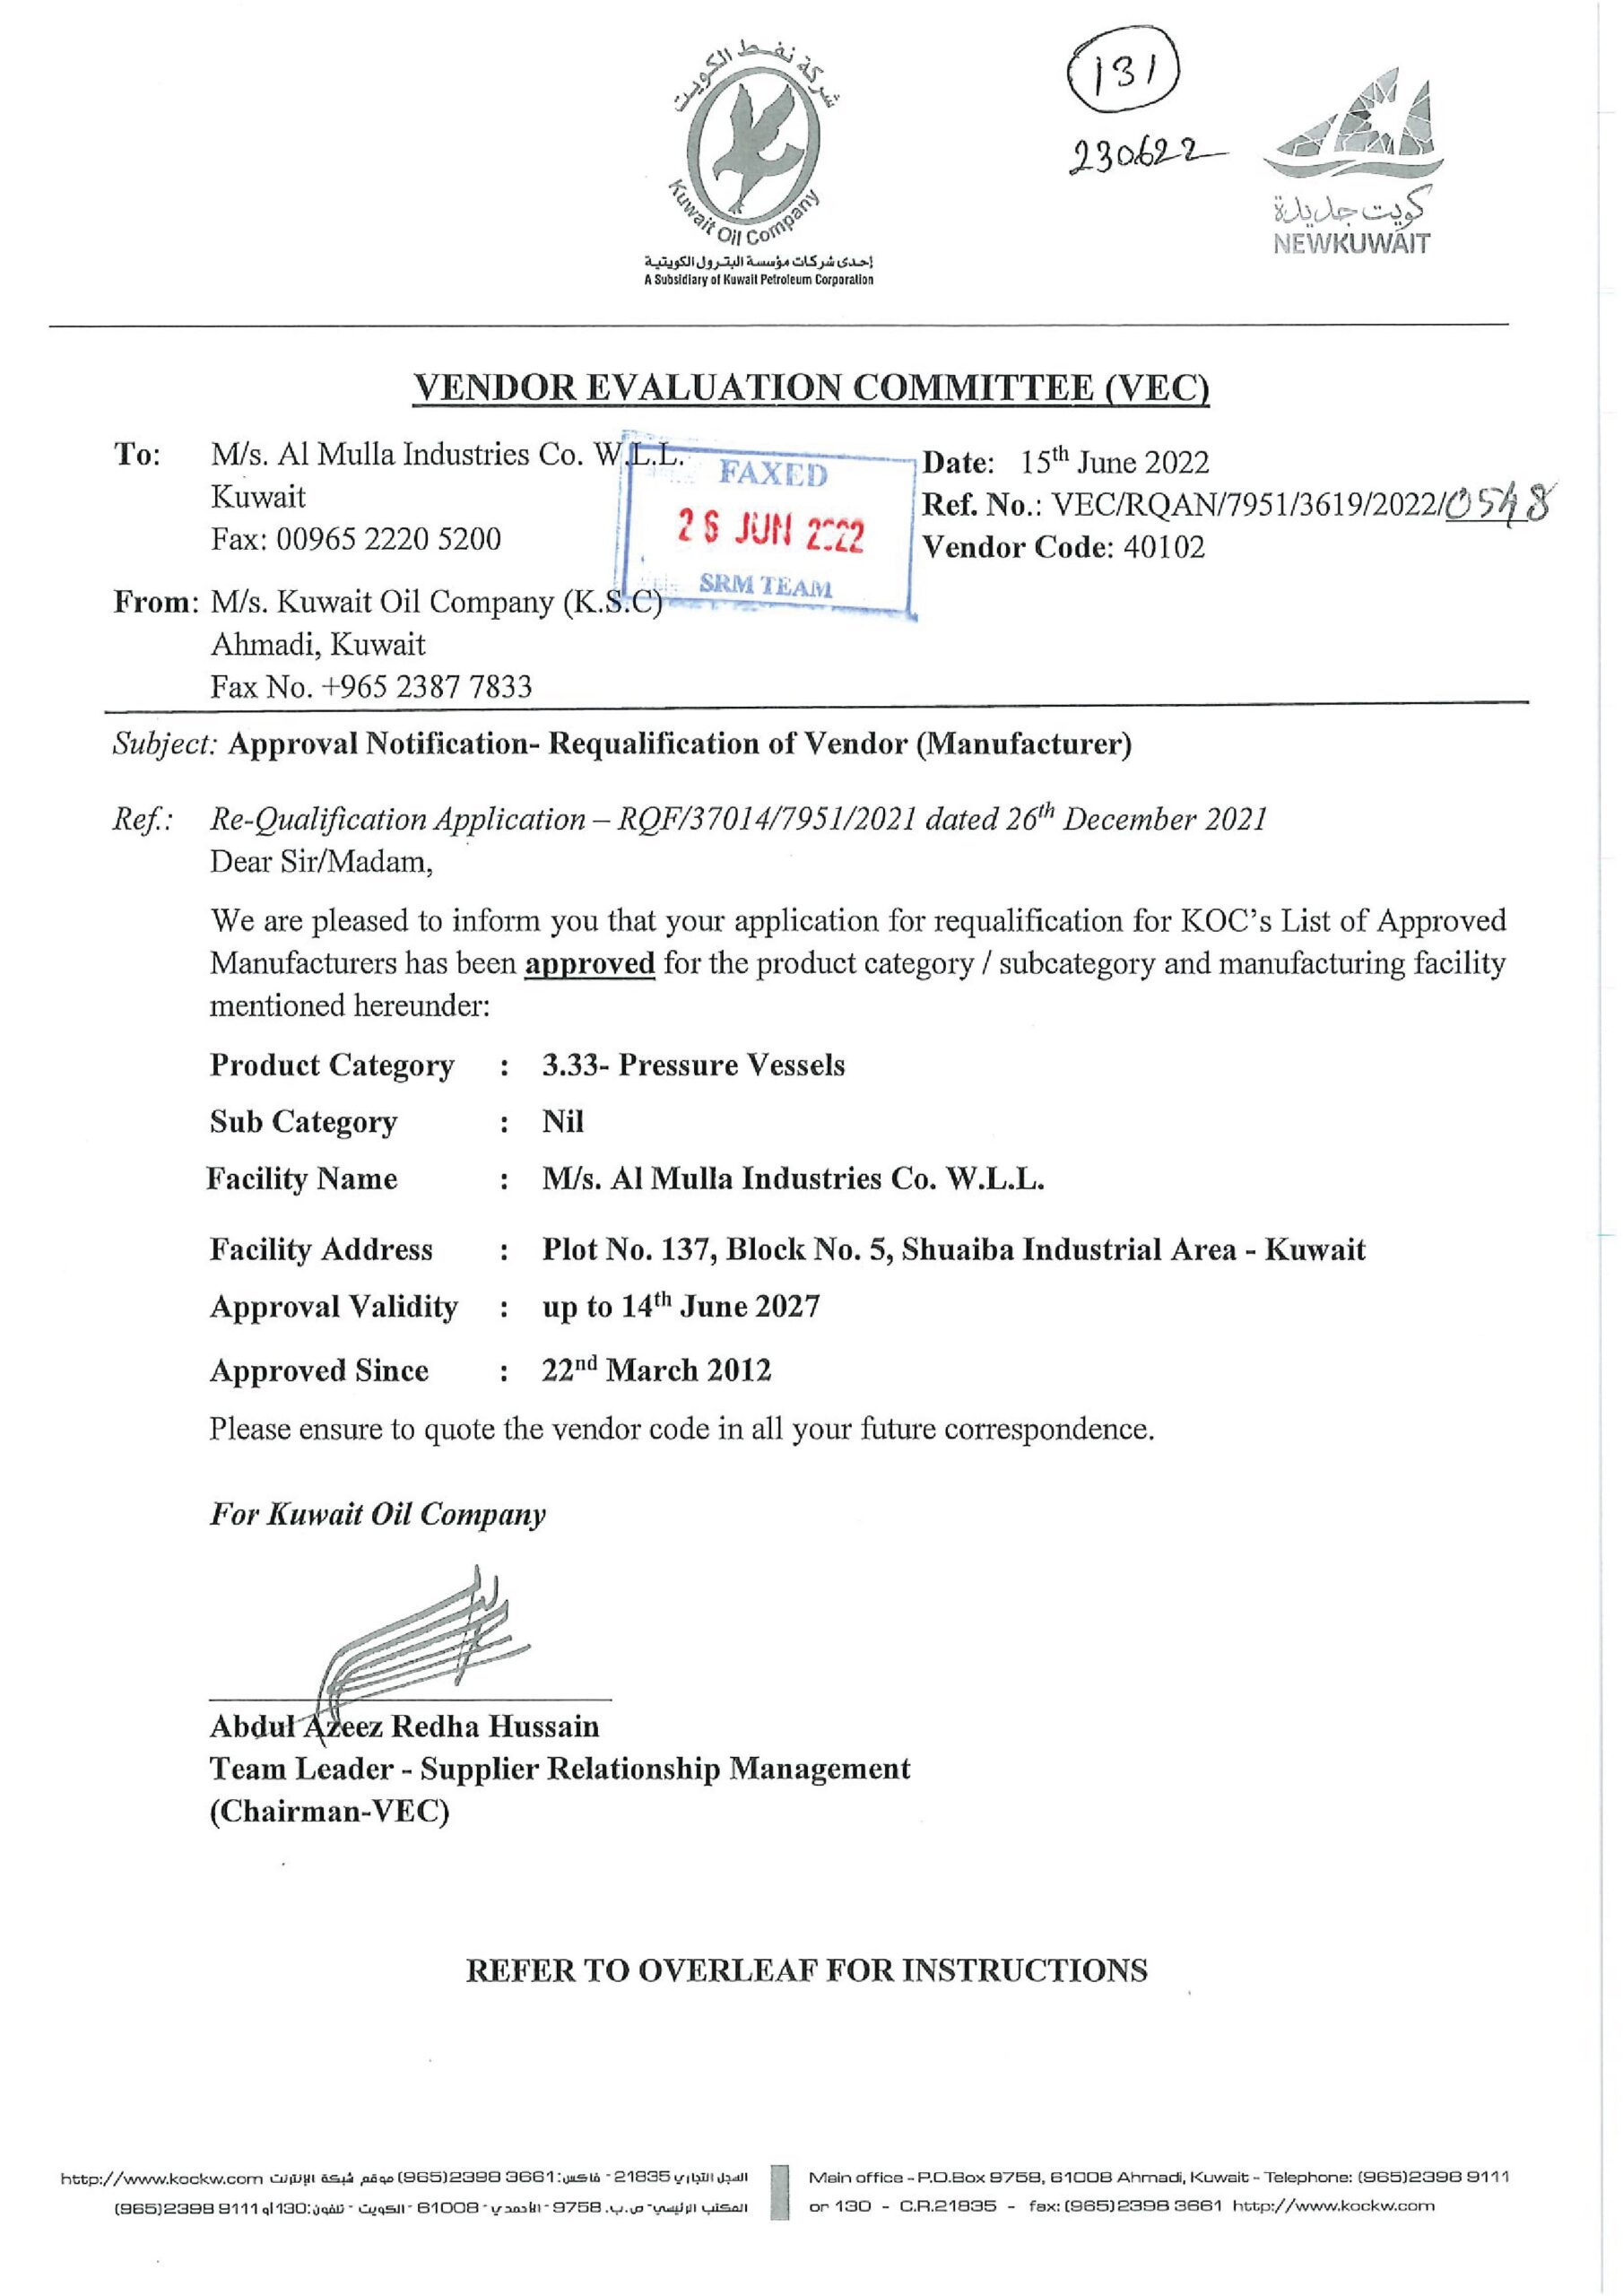 KNPC-Re-Qualification-of-Vendor-Approval-Notification-1-e1682510533527